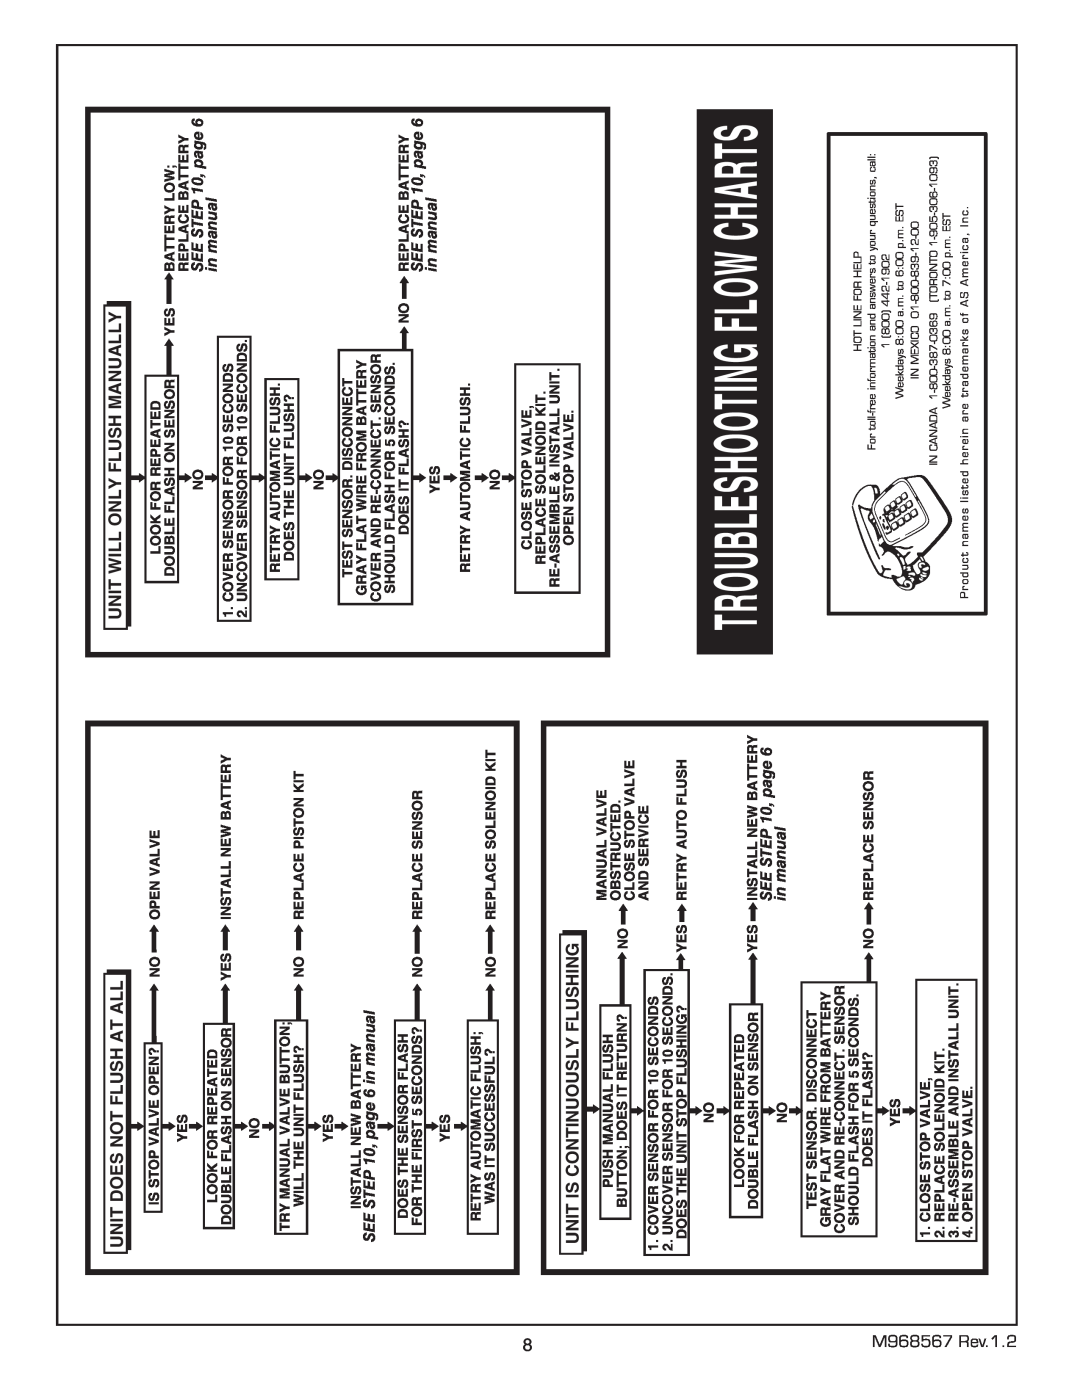 American Standard 6063.051, 6063.505, 6063.510 Troubleshooting Flow Charts, M968567 Rev.1.2, SEE , page 6 in manual 